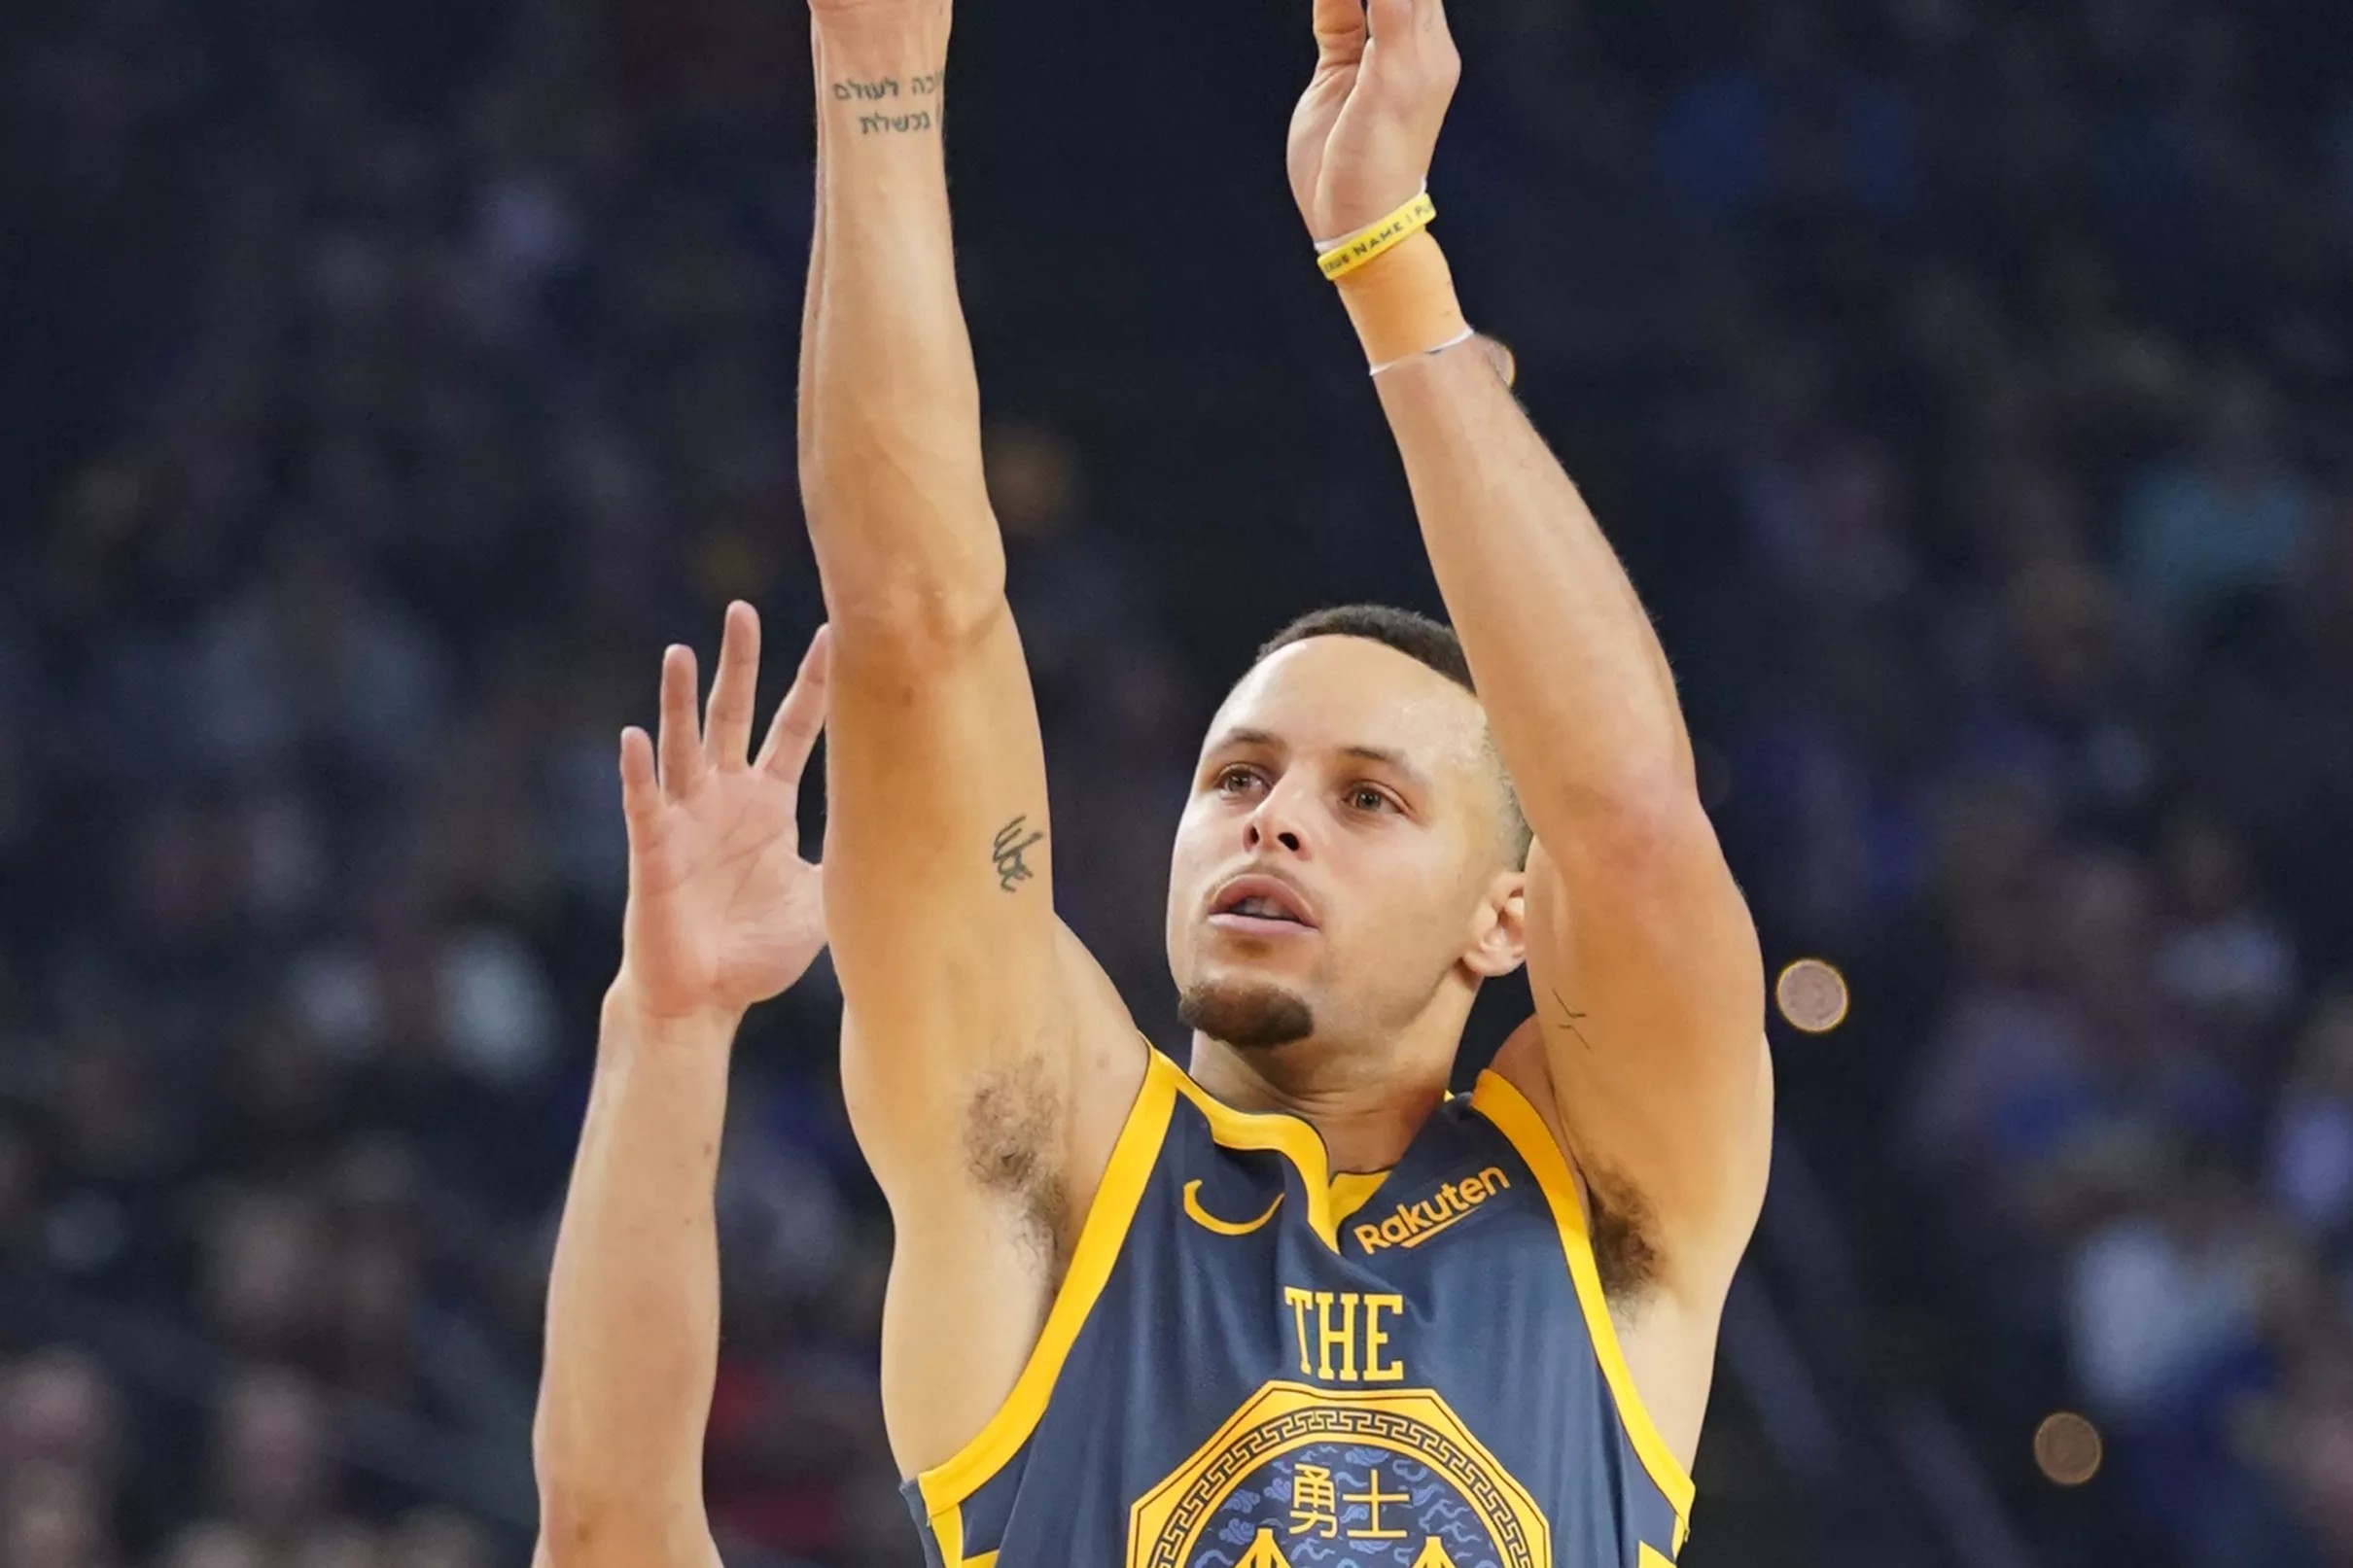 Steph Curry enters tonight’s game against the Grizzlies just 10 points